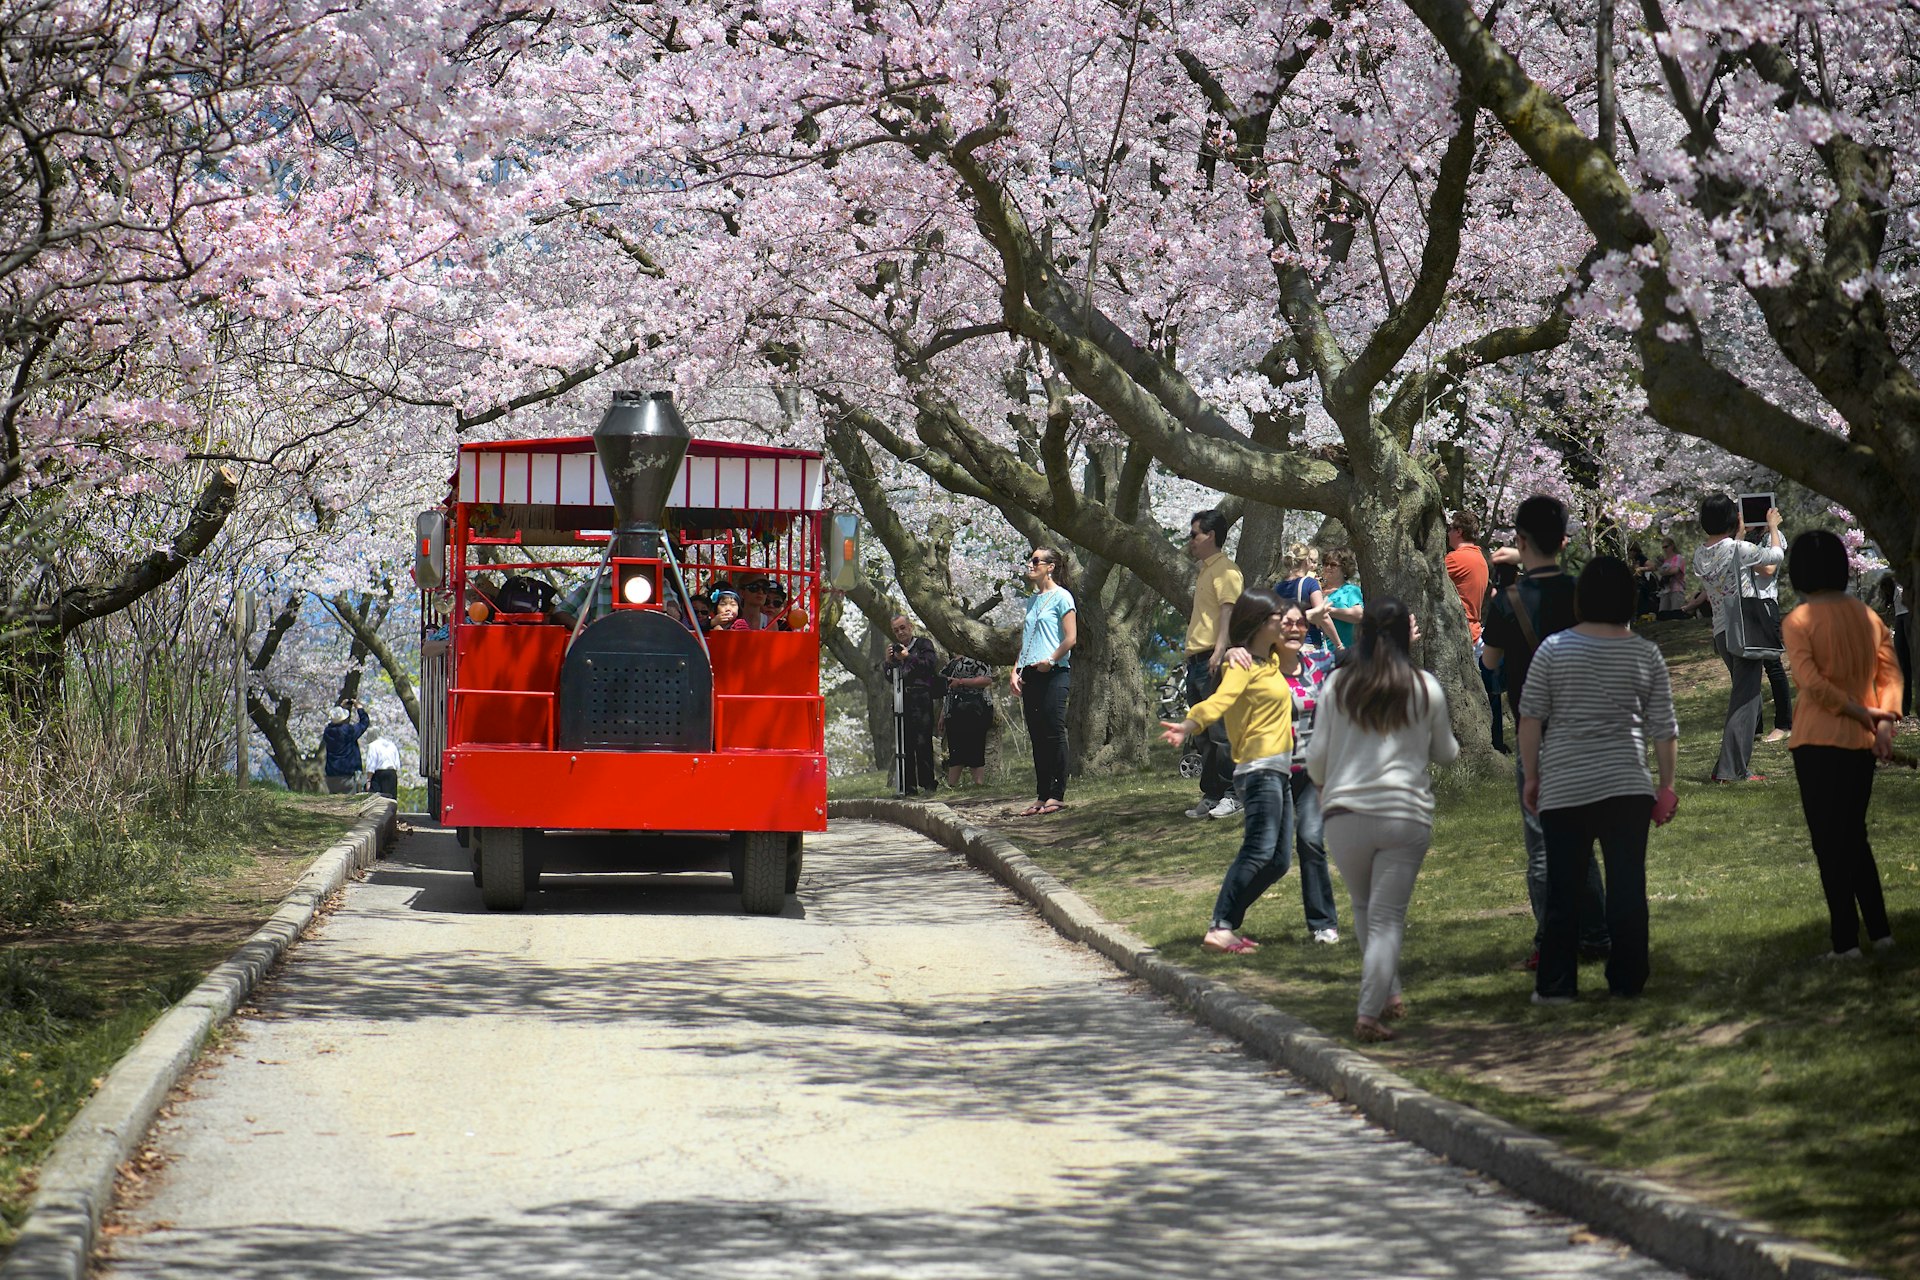 Cherry blossoms in full bloom in Toronto's High Park